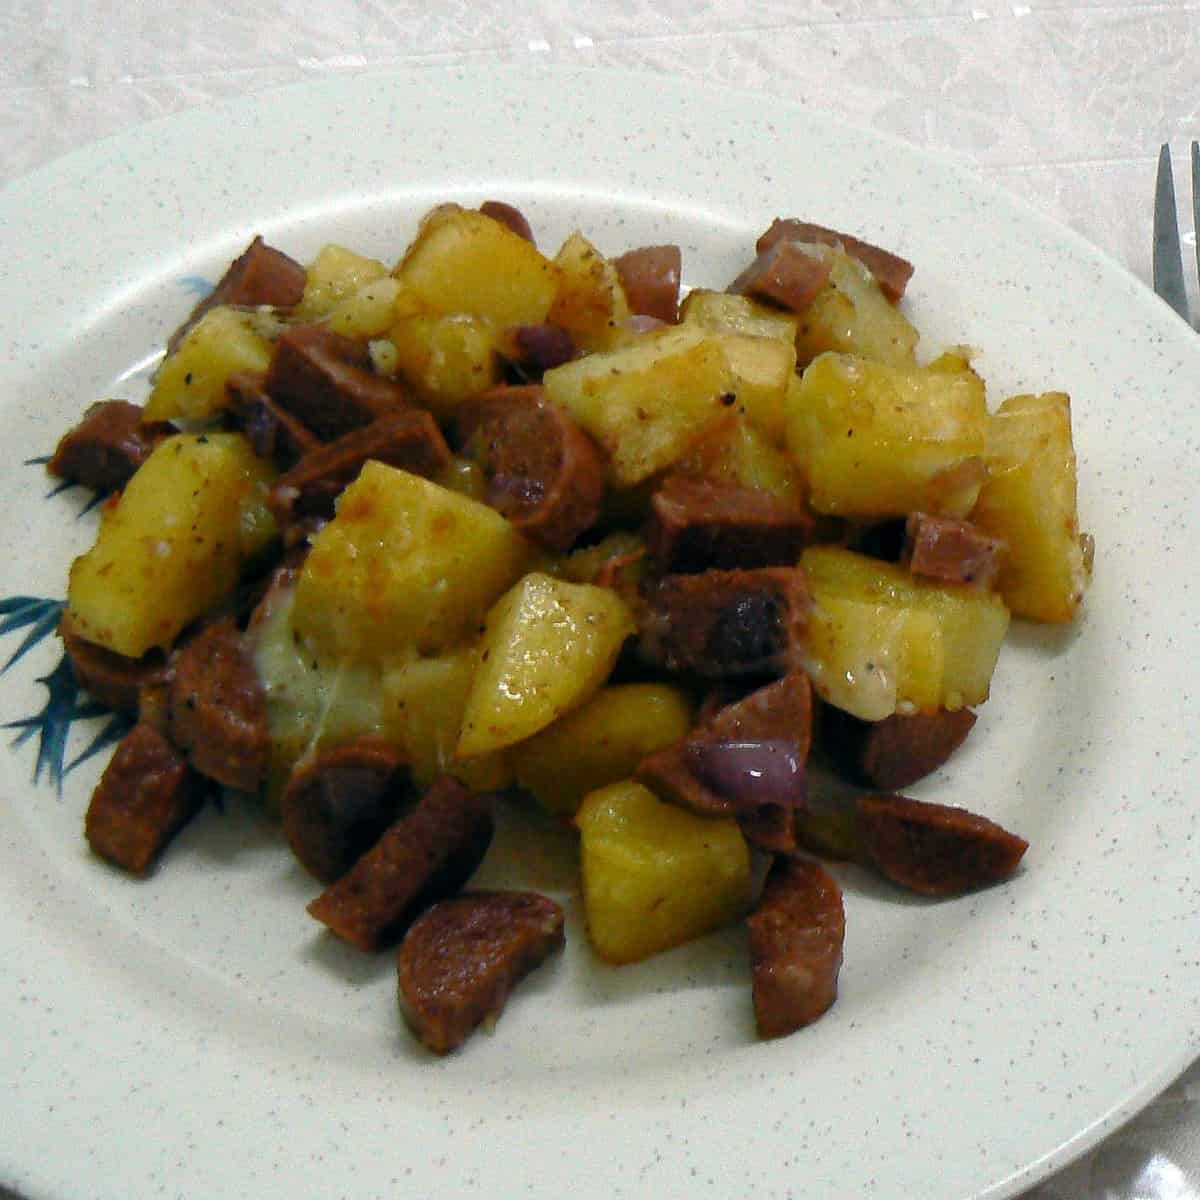  These fried potatoes will make your taste buds dance.